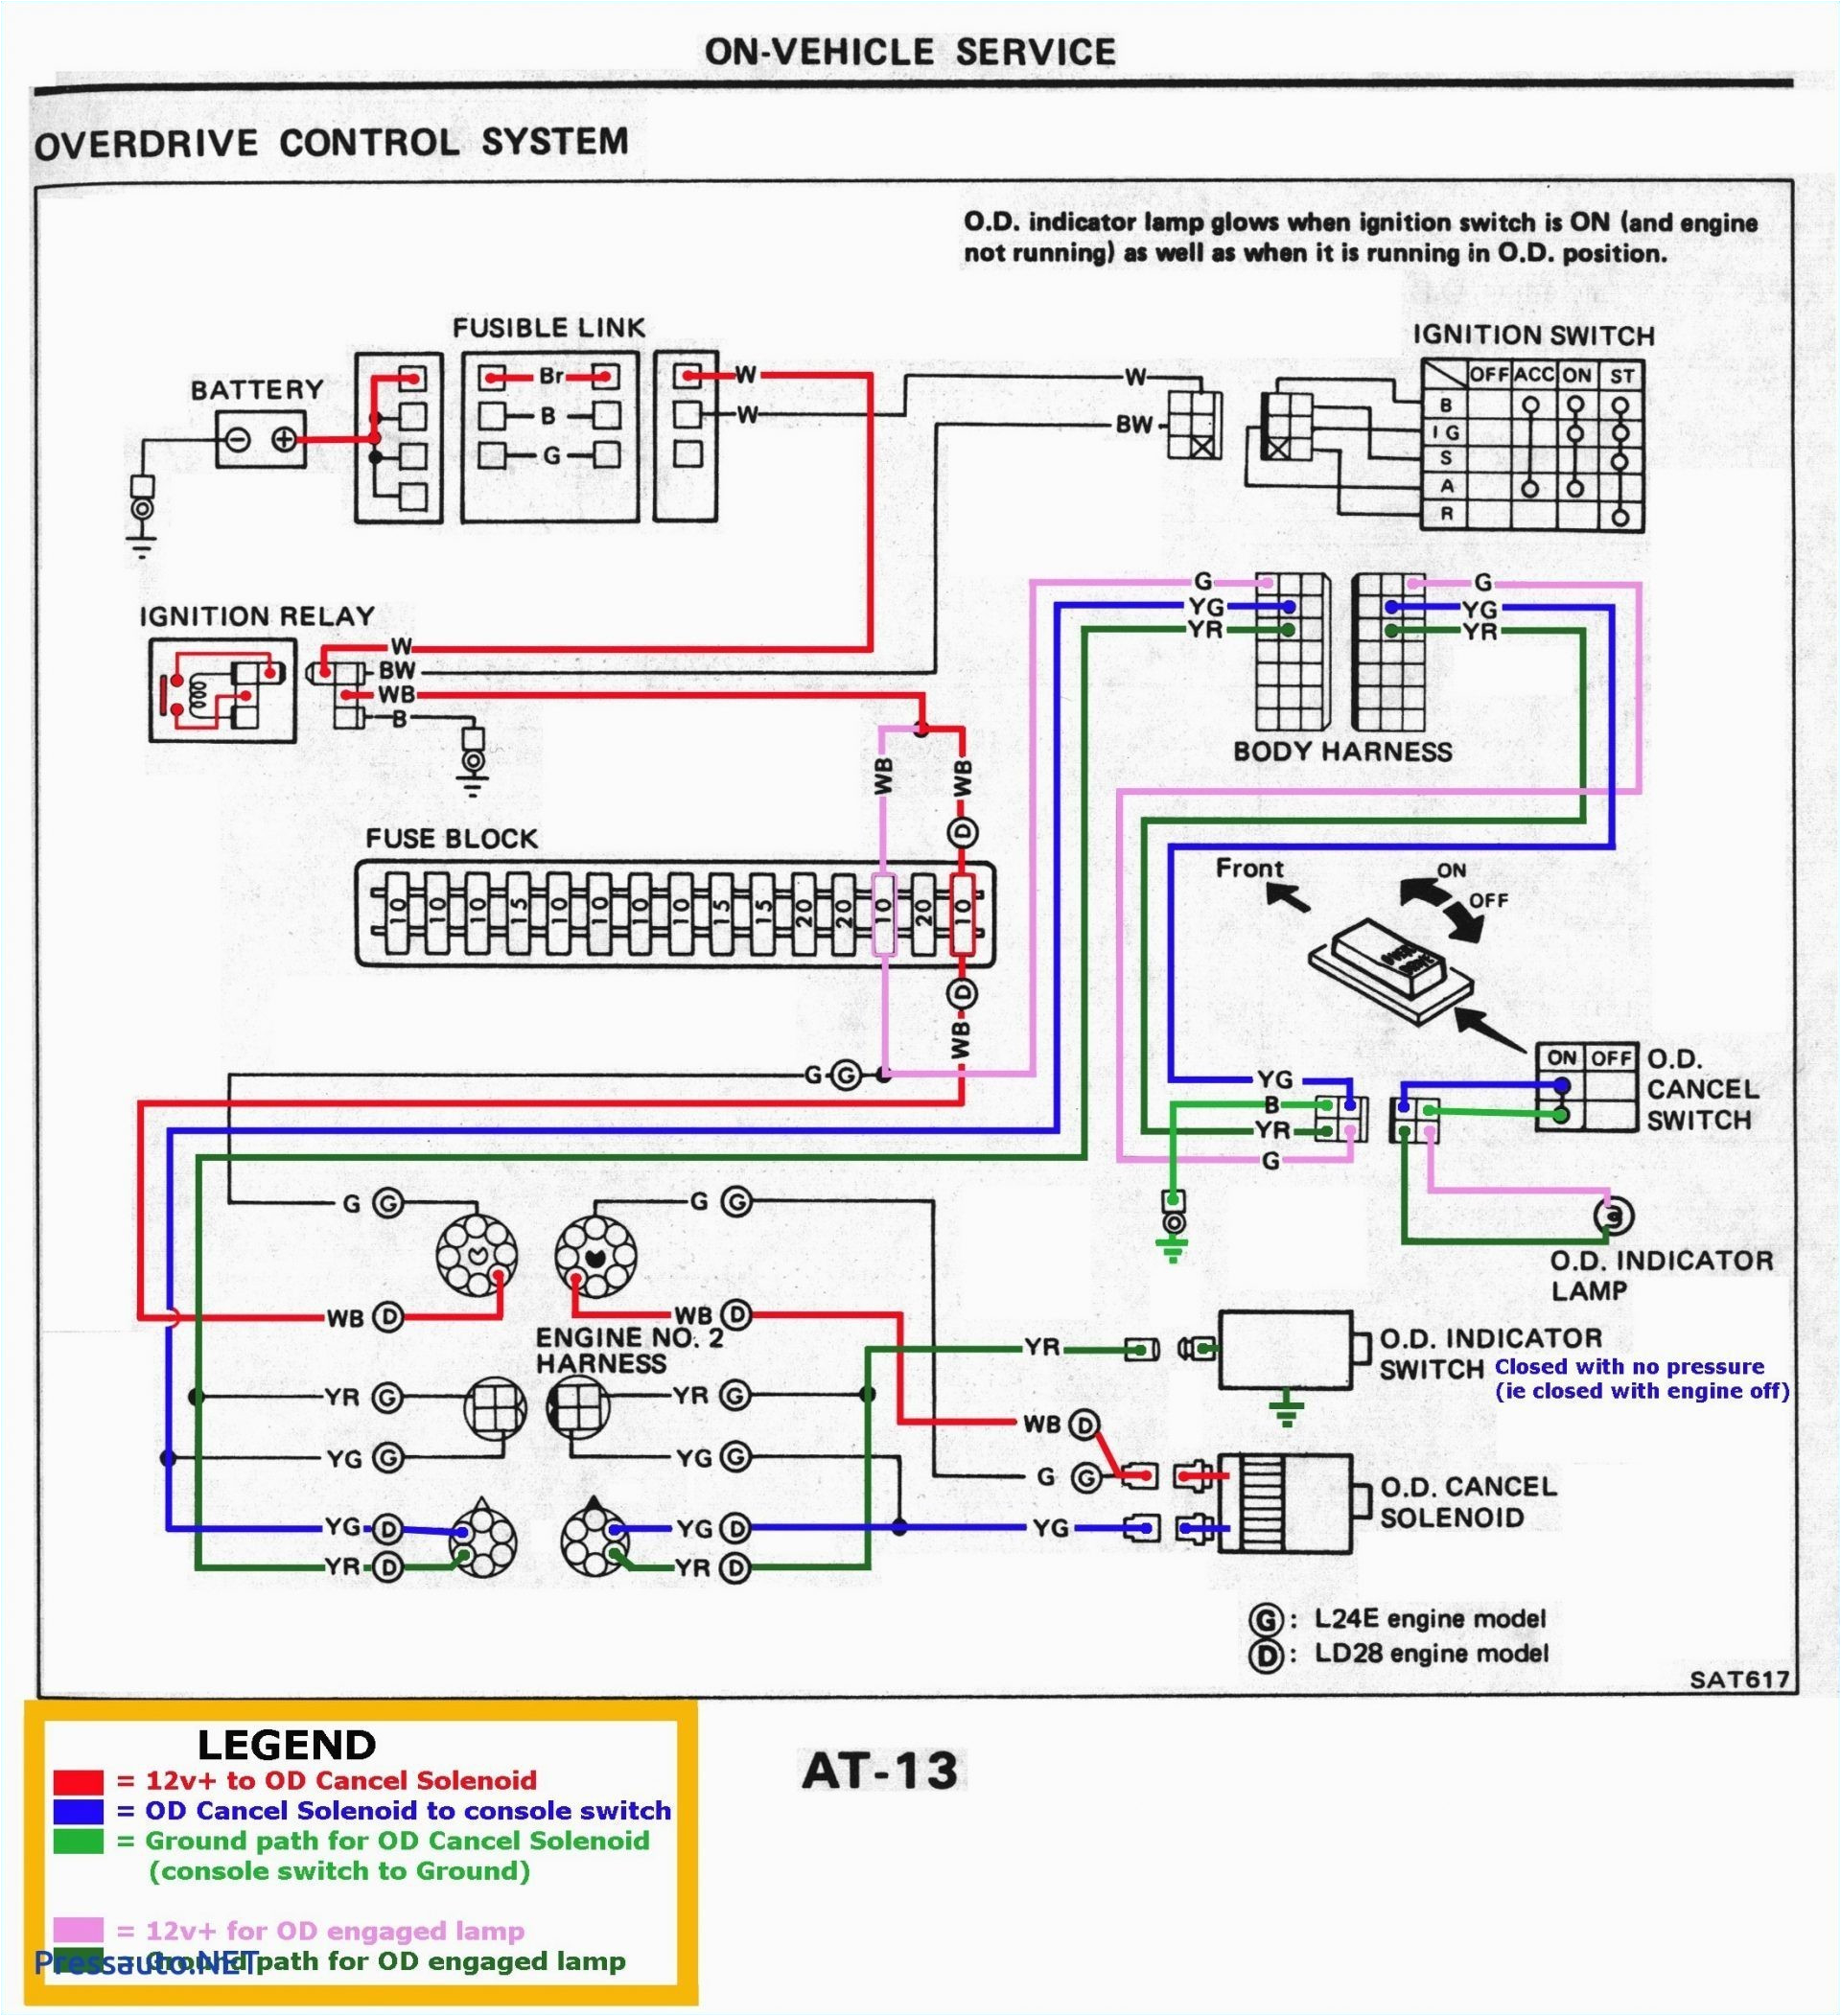 cooper wiring diagram 6 lamp getting ready with wiring diagram 277w box wiring diagram wiring diagram